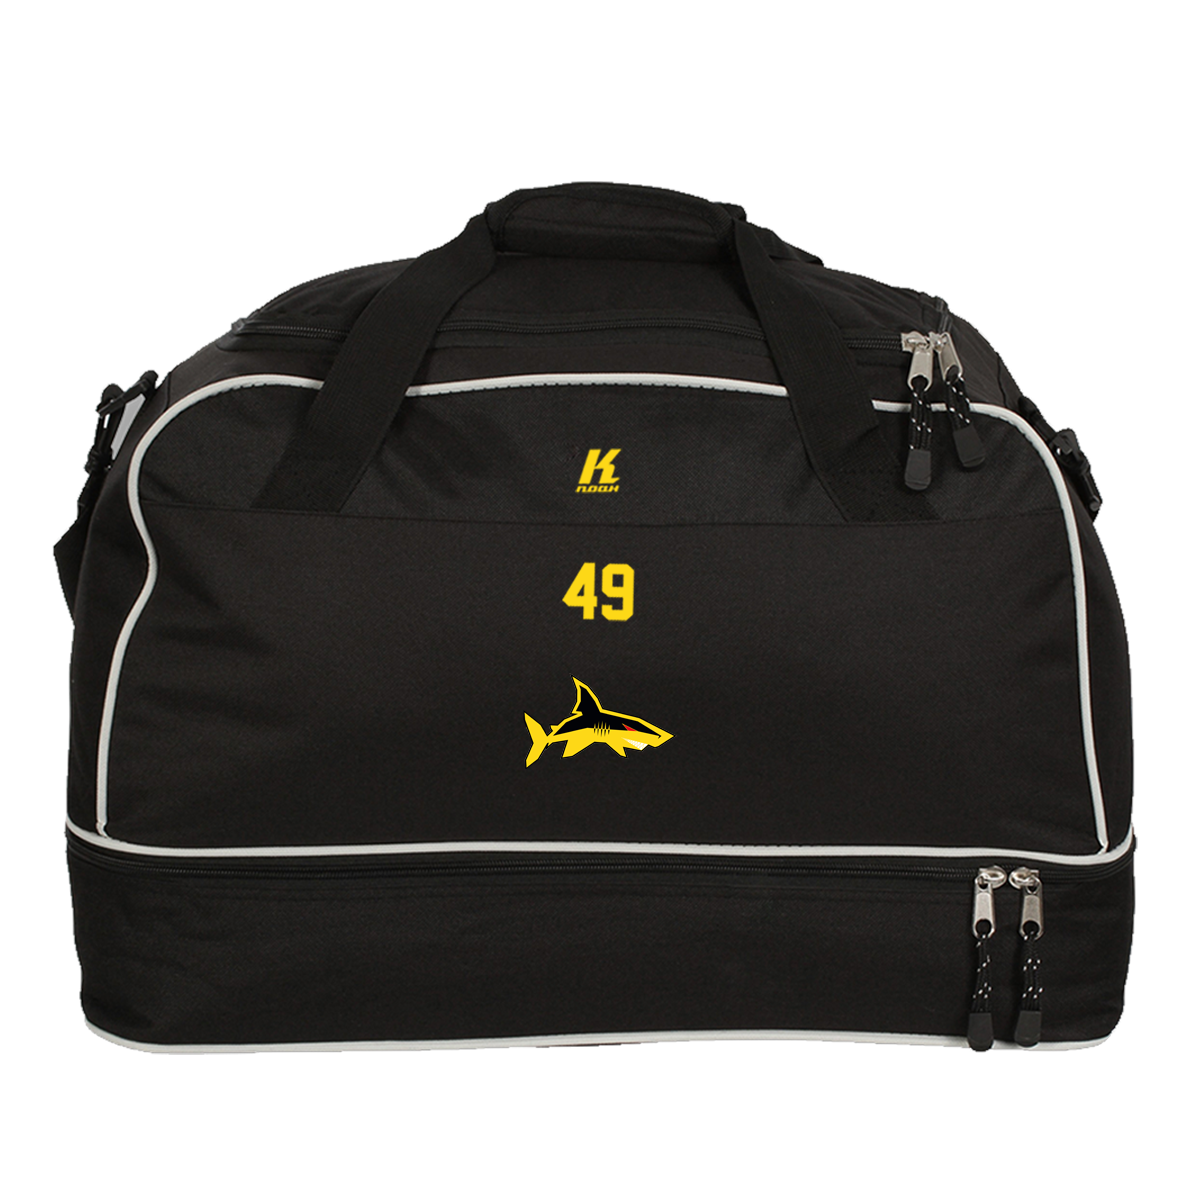 Sharks Players CT Bag with Playernumber or Initials